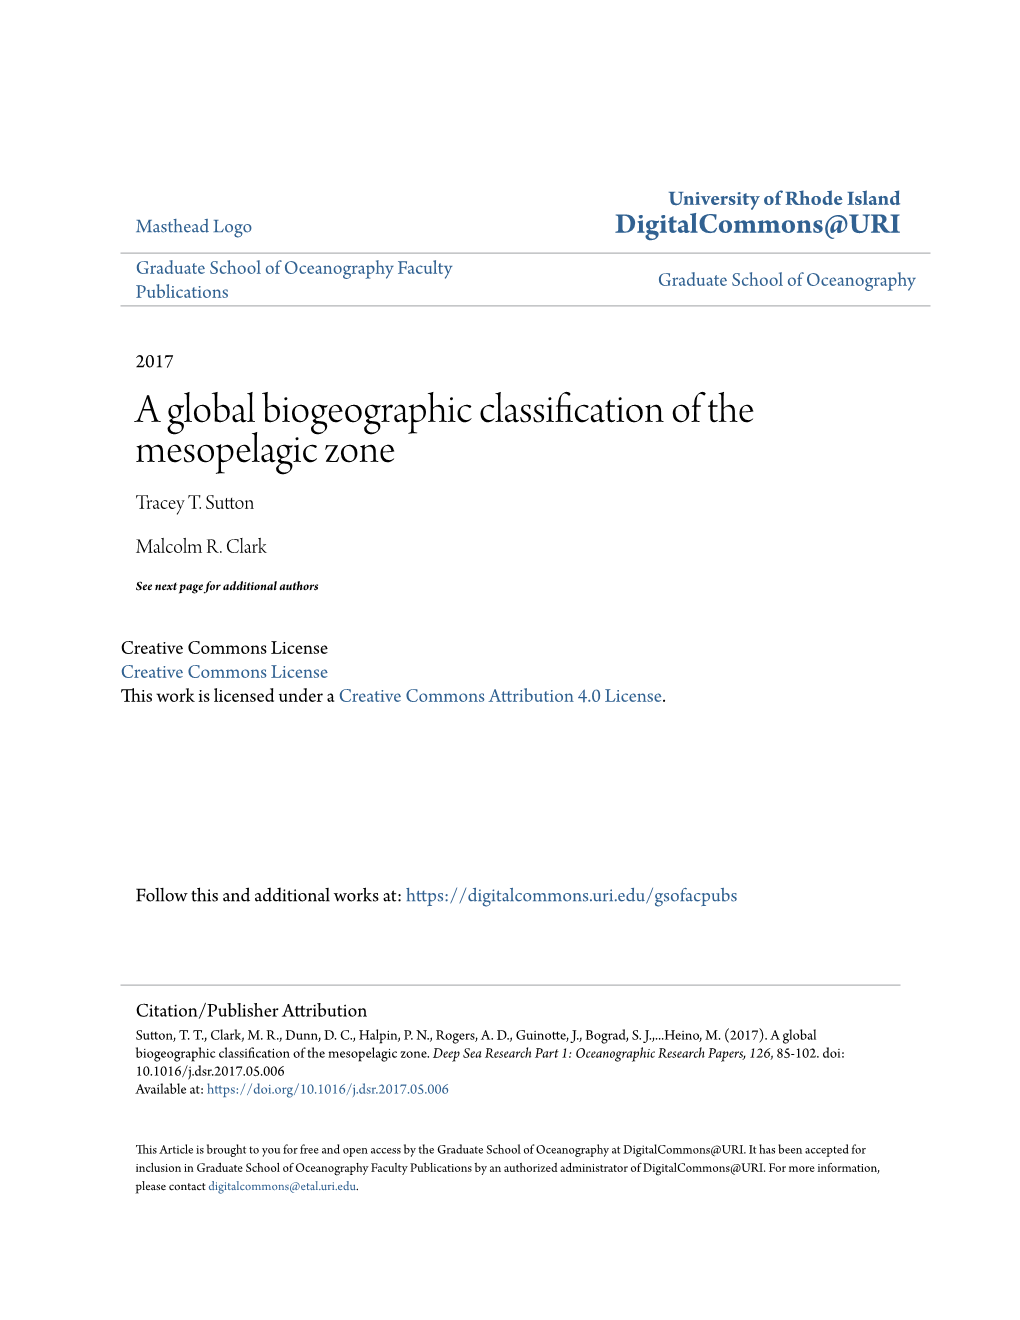 A Global Biogeographic Classification of the Mesopelagic Zone Tracey T